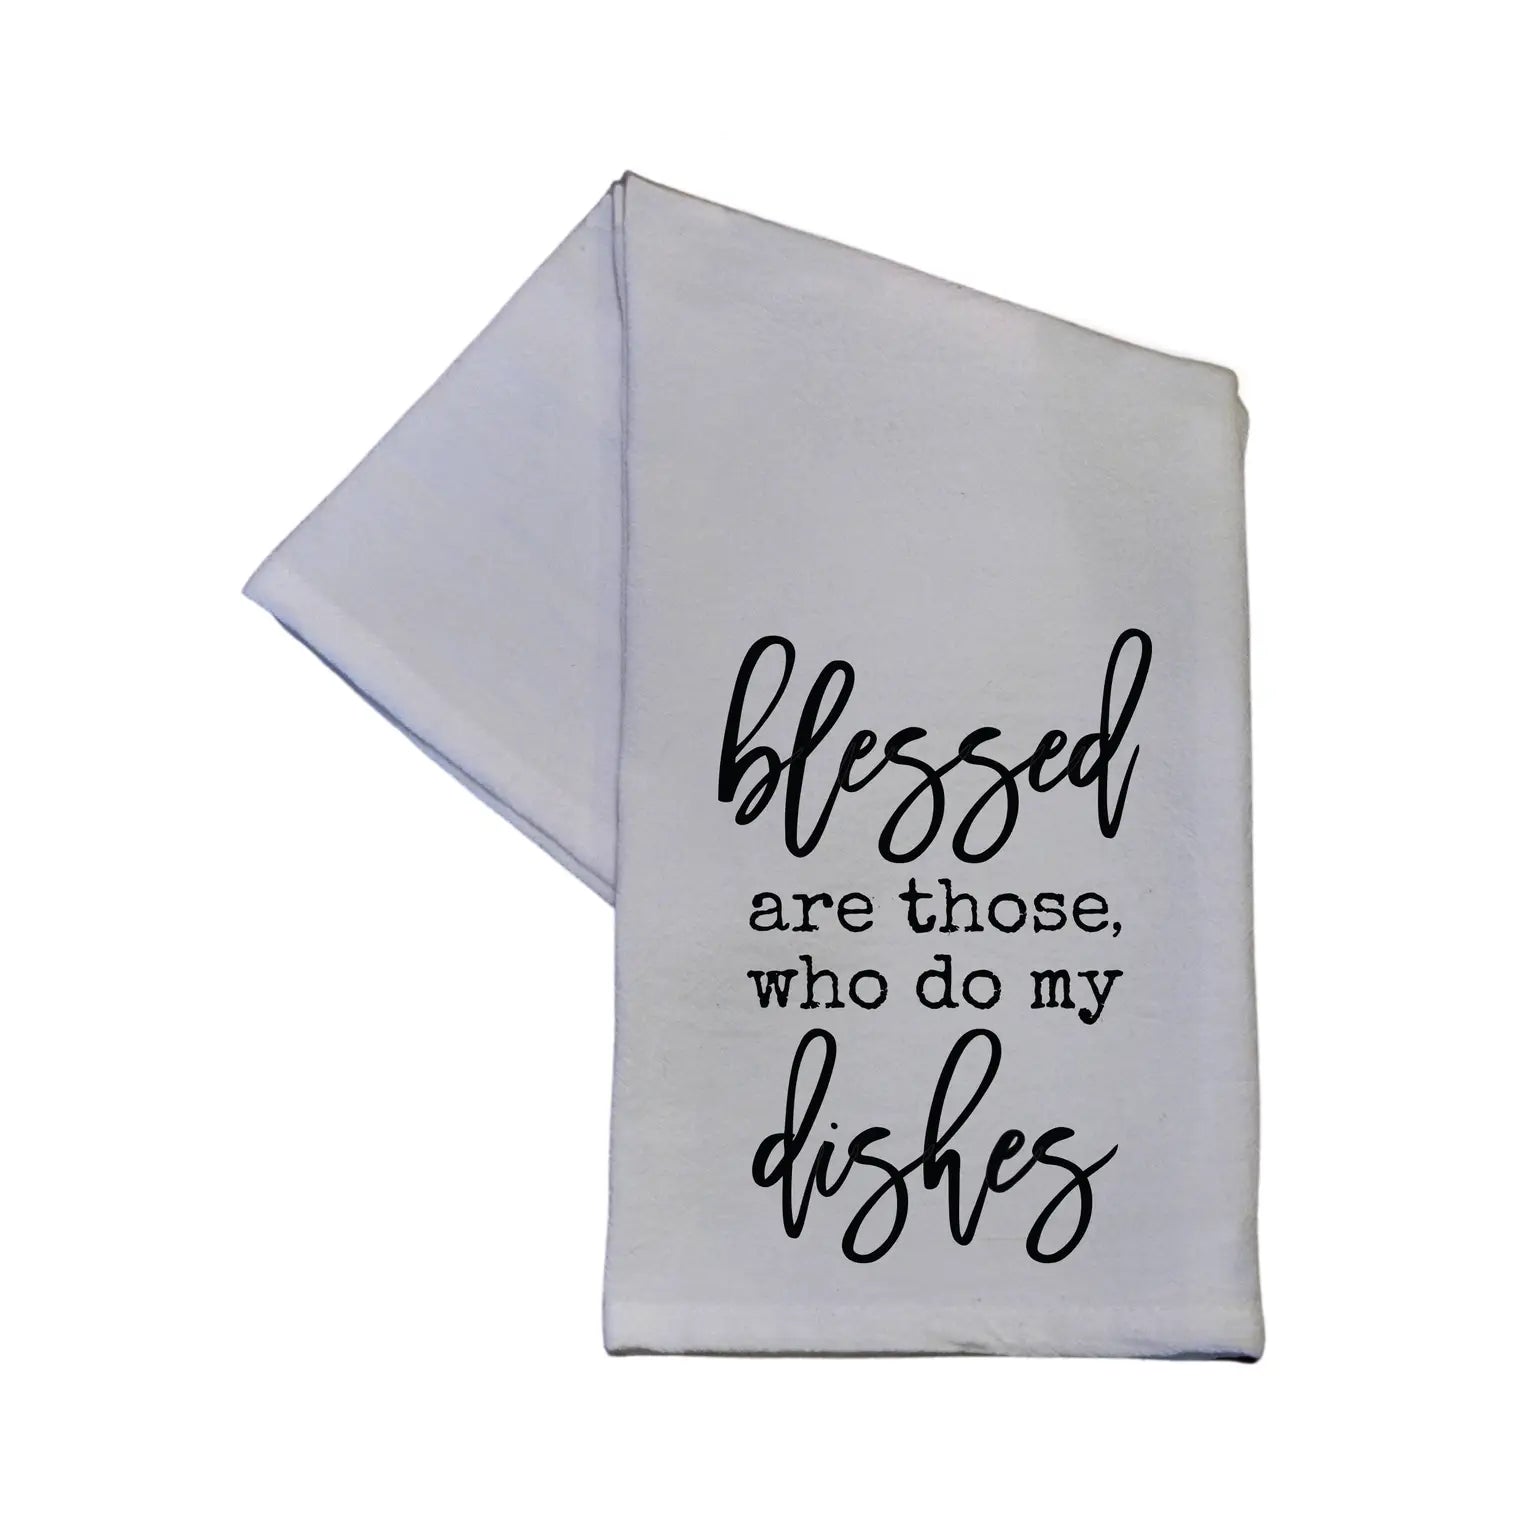 Blessed / Dishes Towel